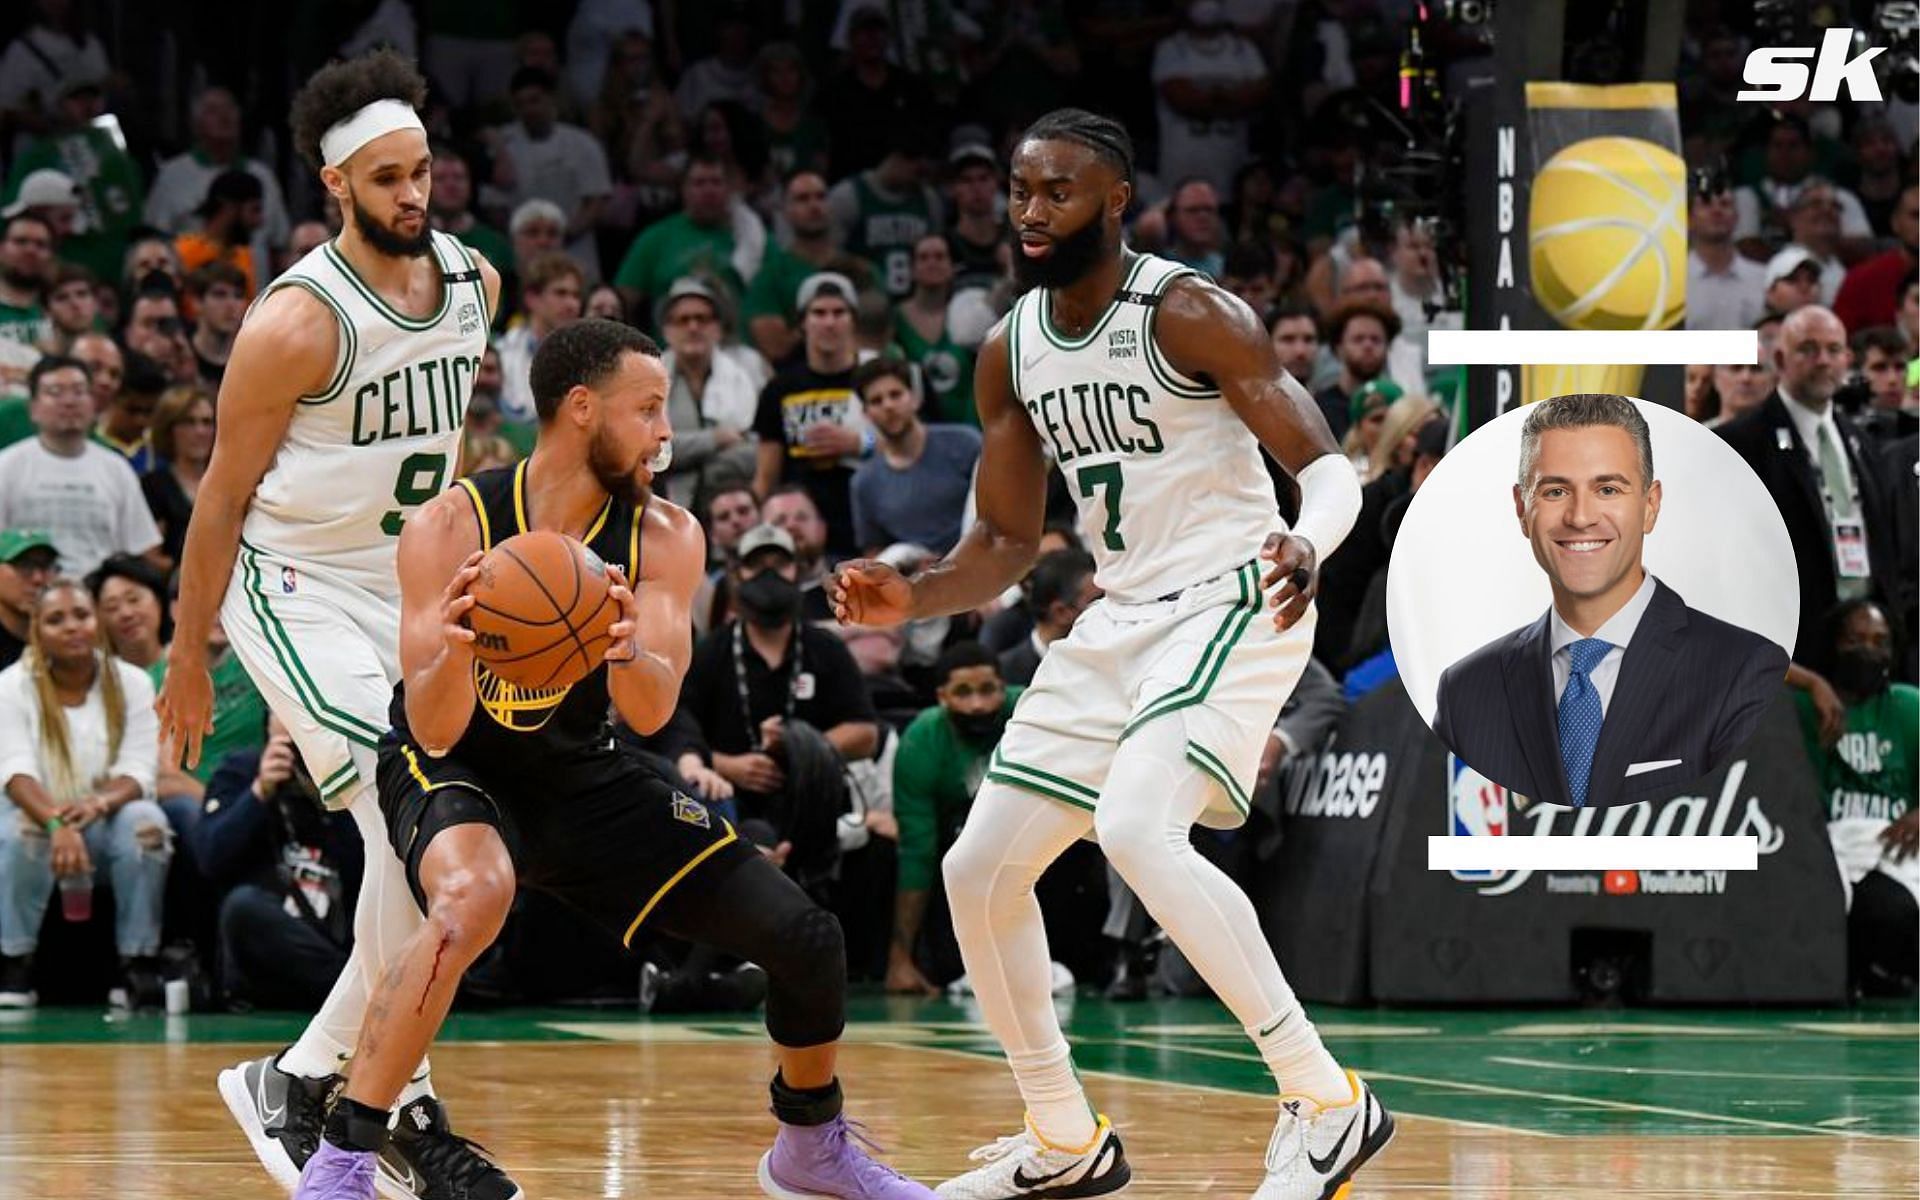 Boston Celtics will be looking to take a 3-2 lead in the Finals as they move to Game 5